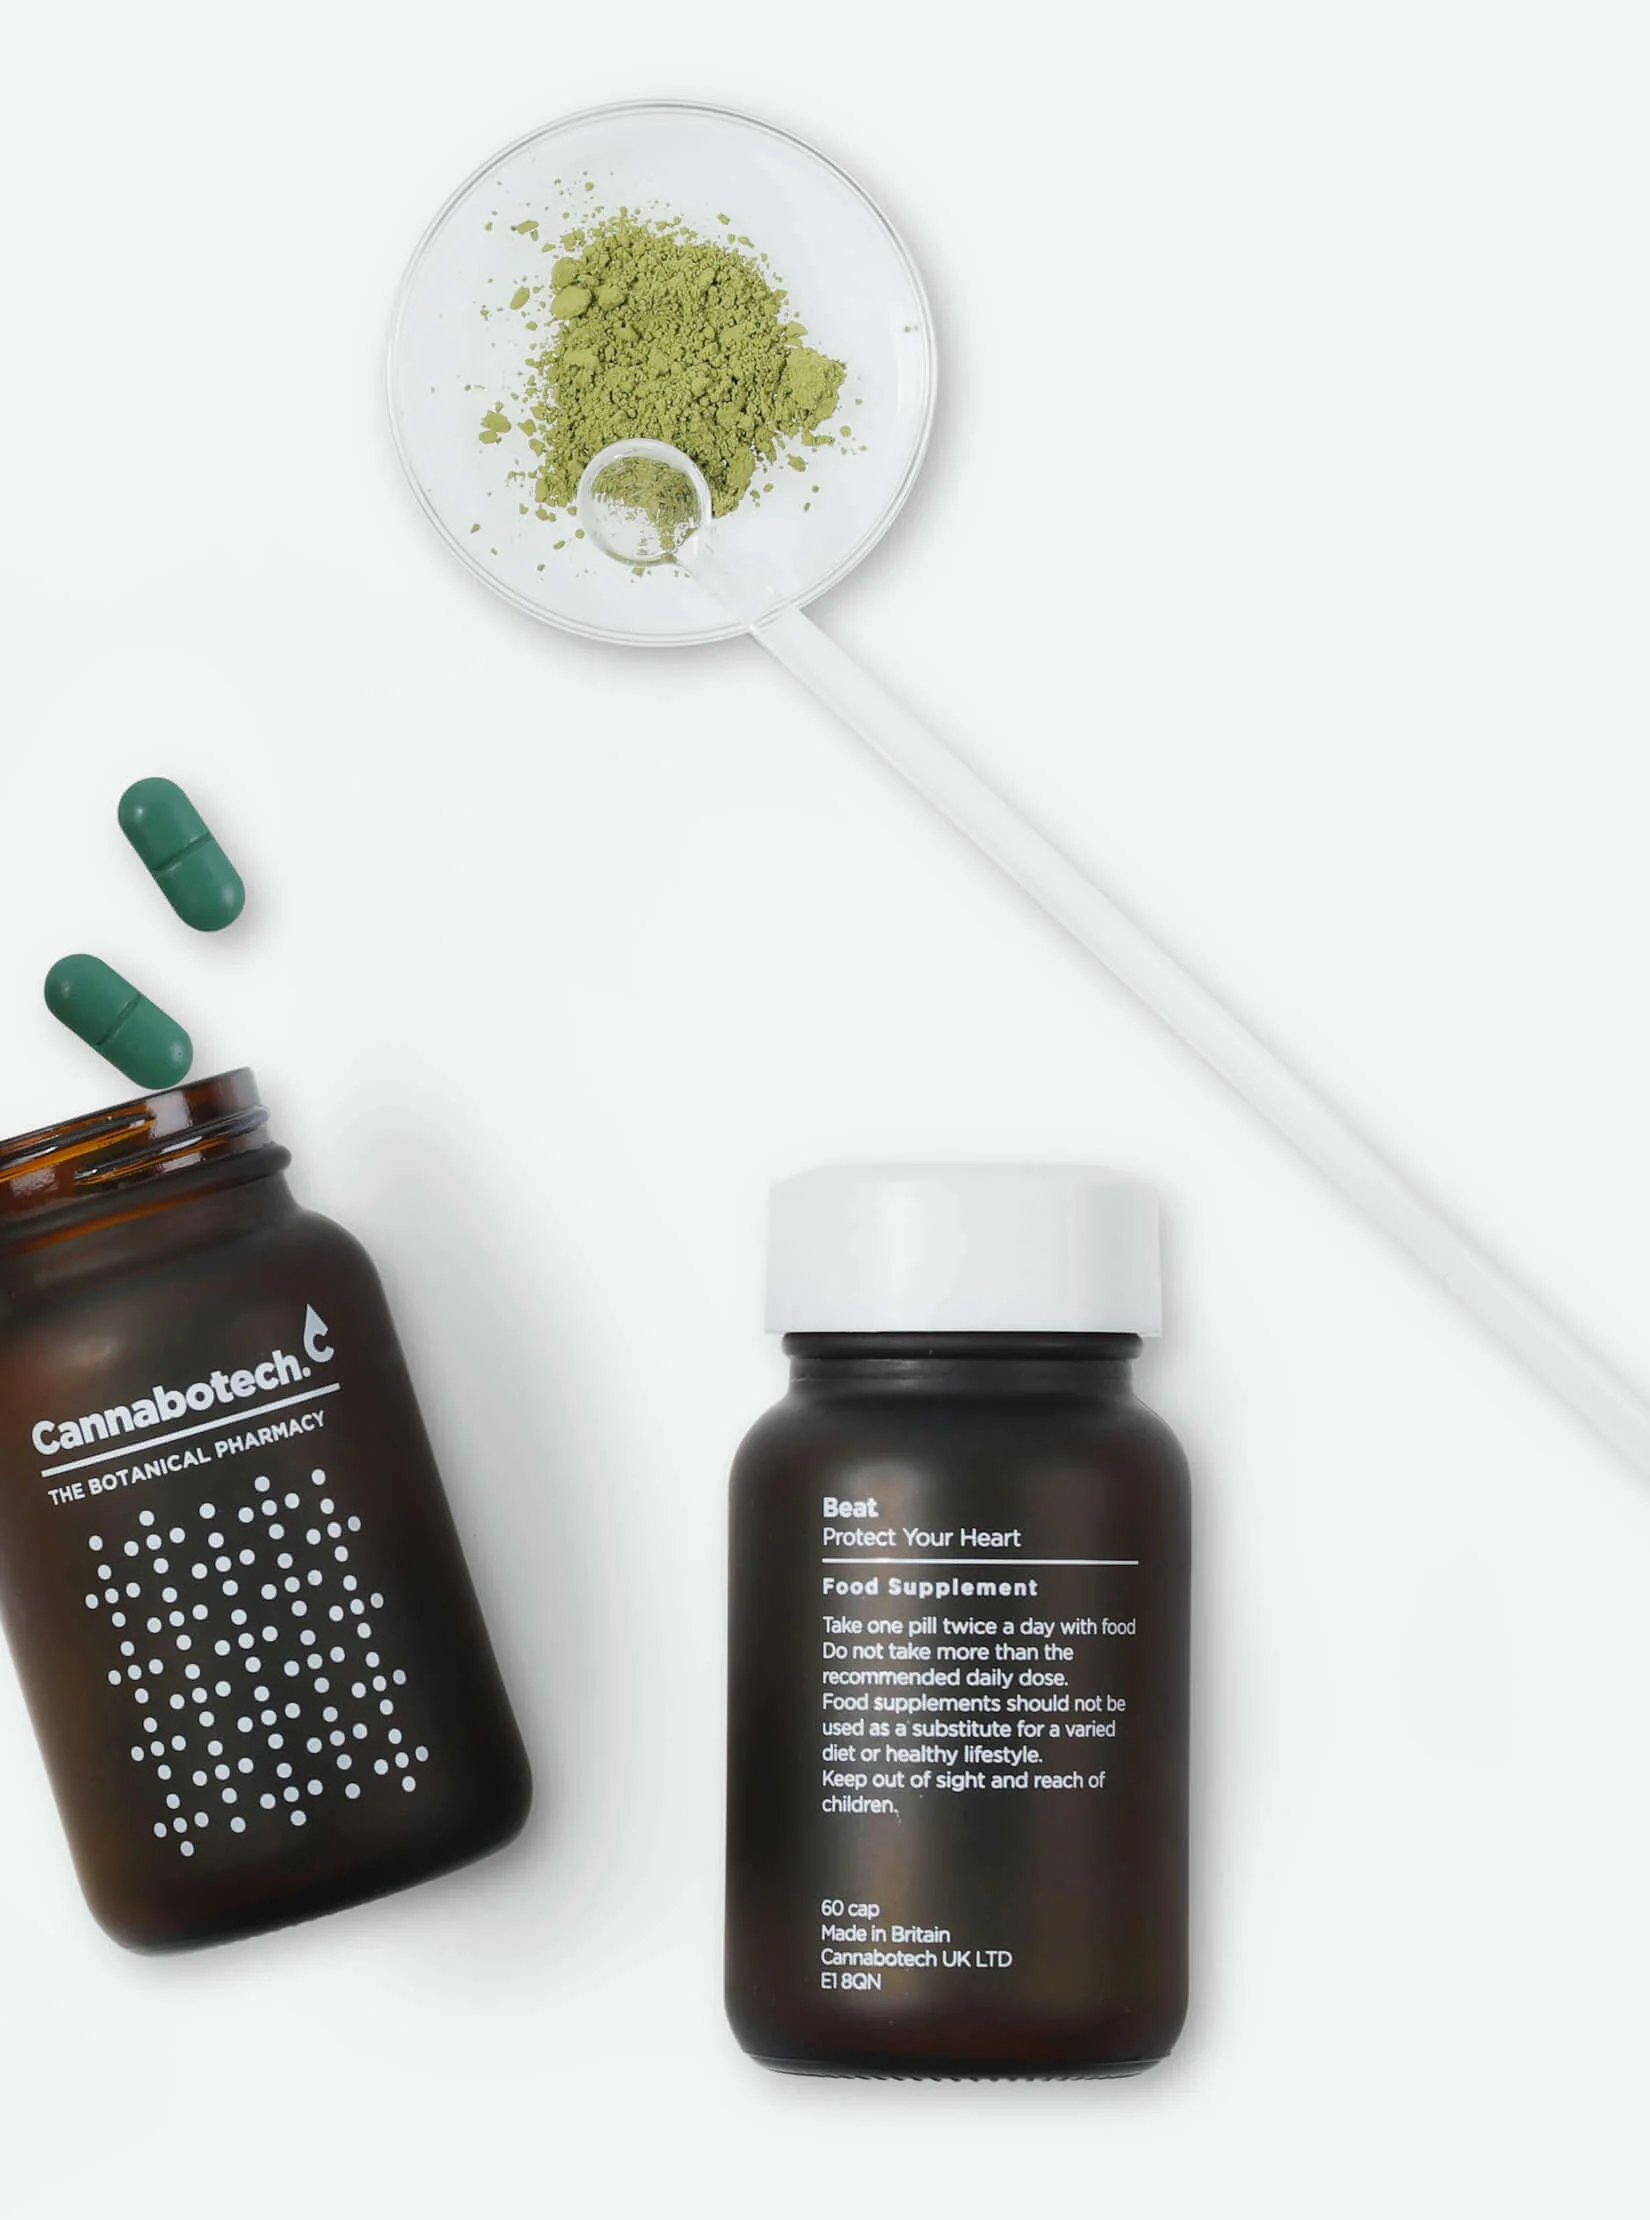 A spoon and a jar of green CBD powder next to two jars of Cannabotech's Beat Food Supplements